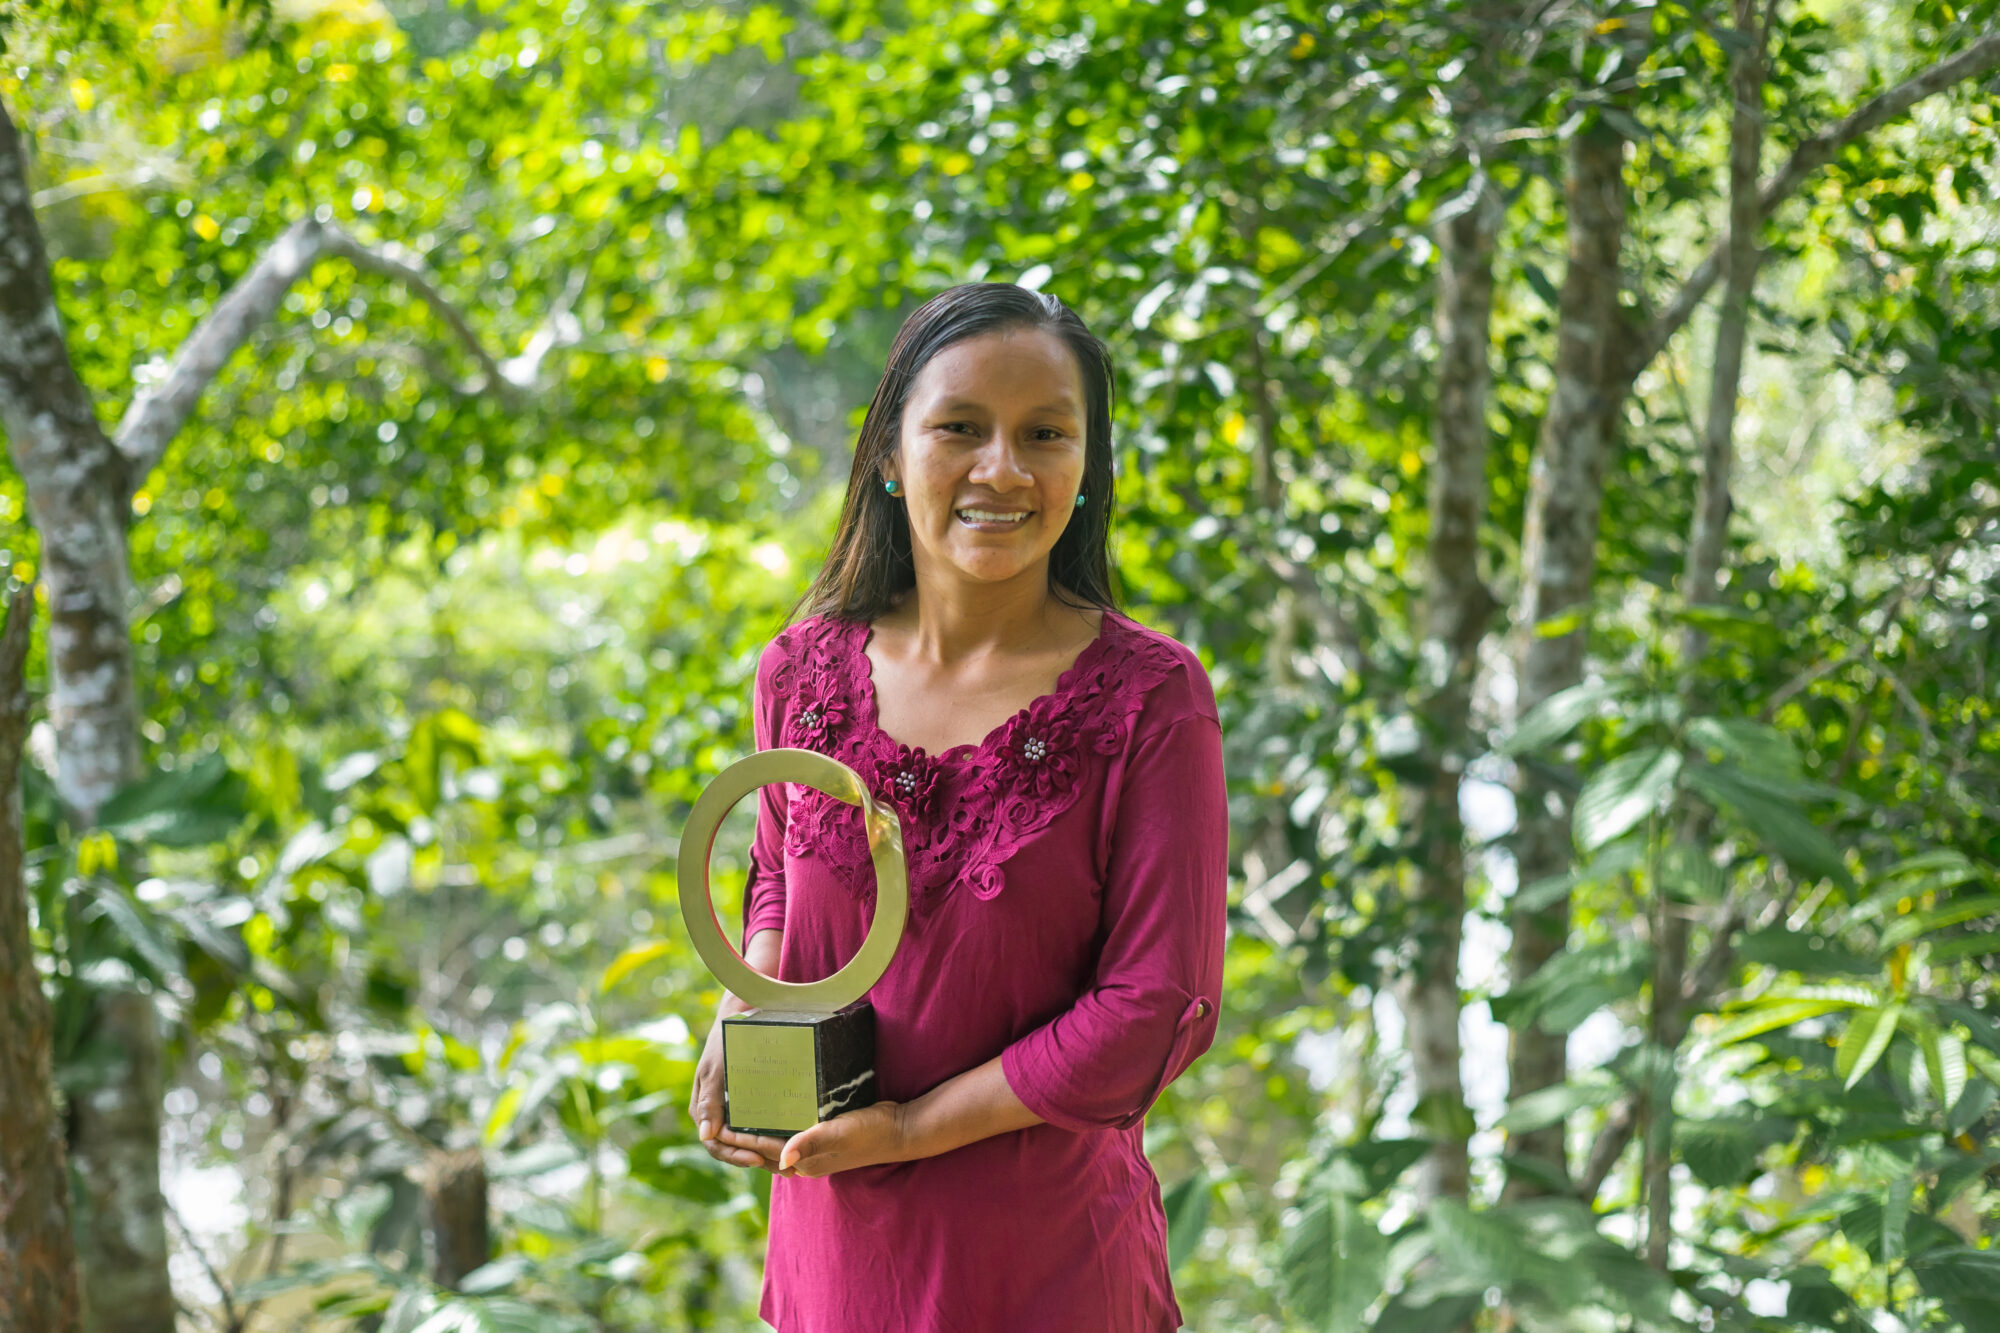 <p>Liz Chicaje has won the Goldman Prize for environmental activism for her efforts to protect Peru&#8217;s Yaguas National Park from illegal logging and mining (image: Goldman Environmental Prize)</p>